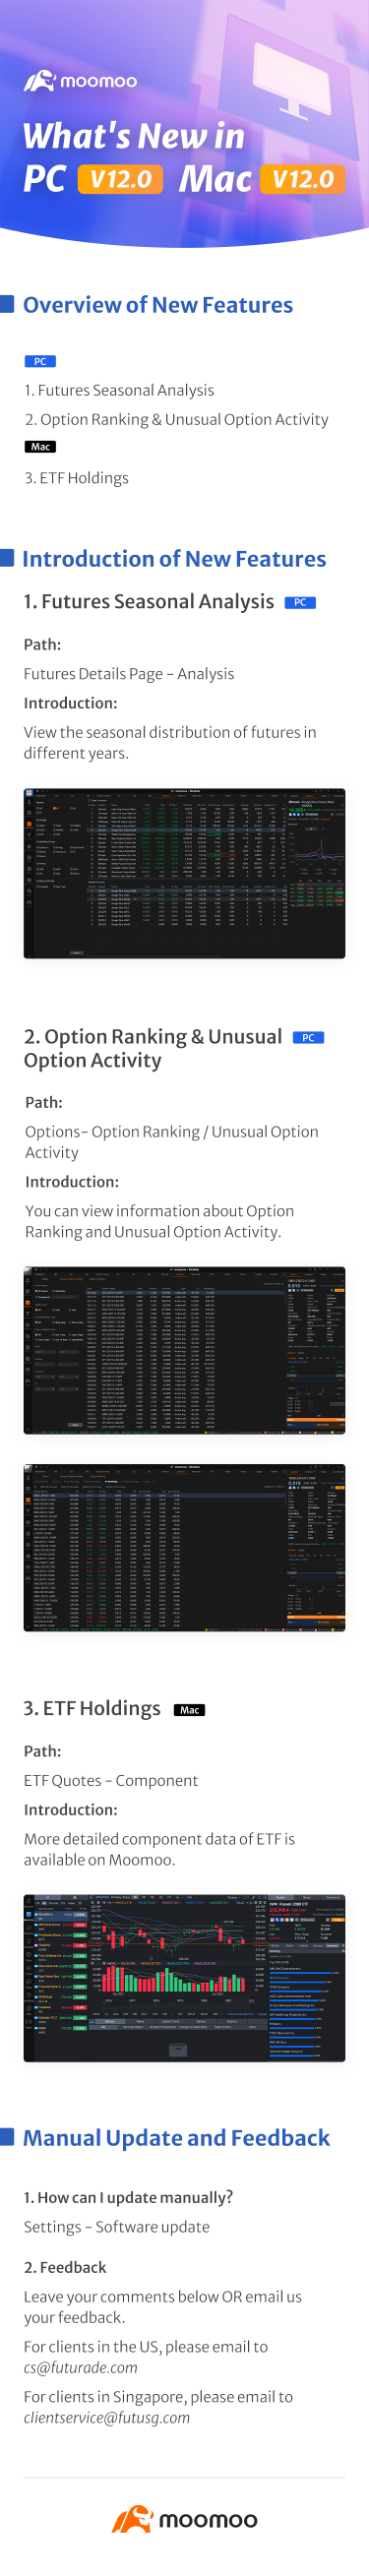 What's New: Option and ETF Related Updates Available in PC v12.0 & Mac v12.0